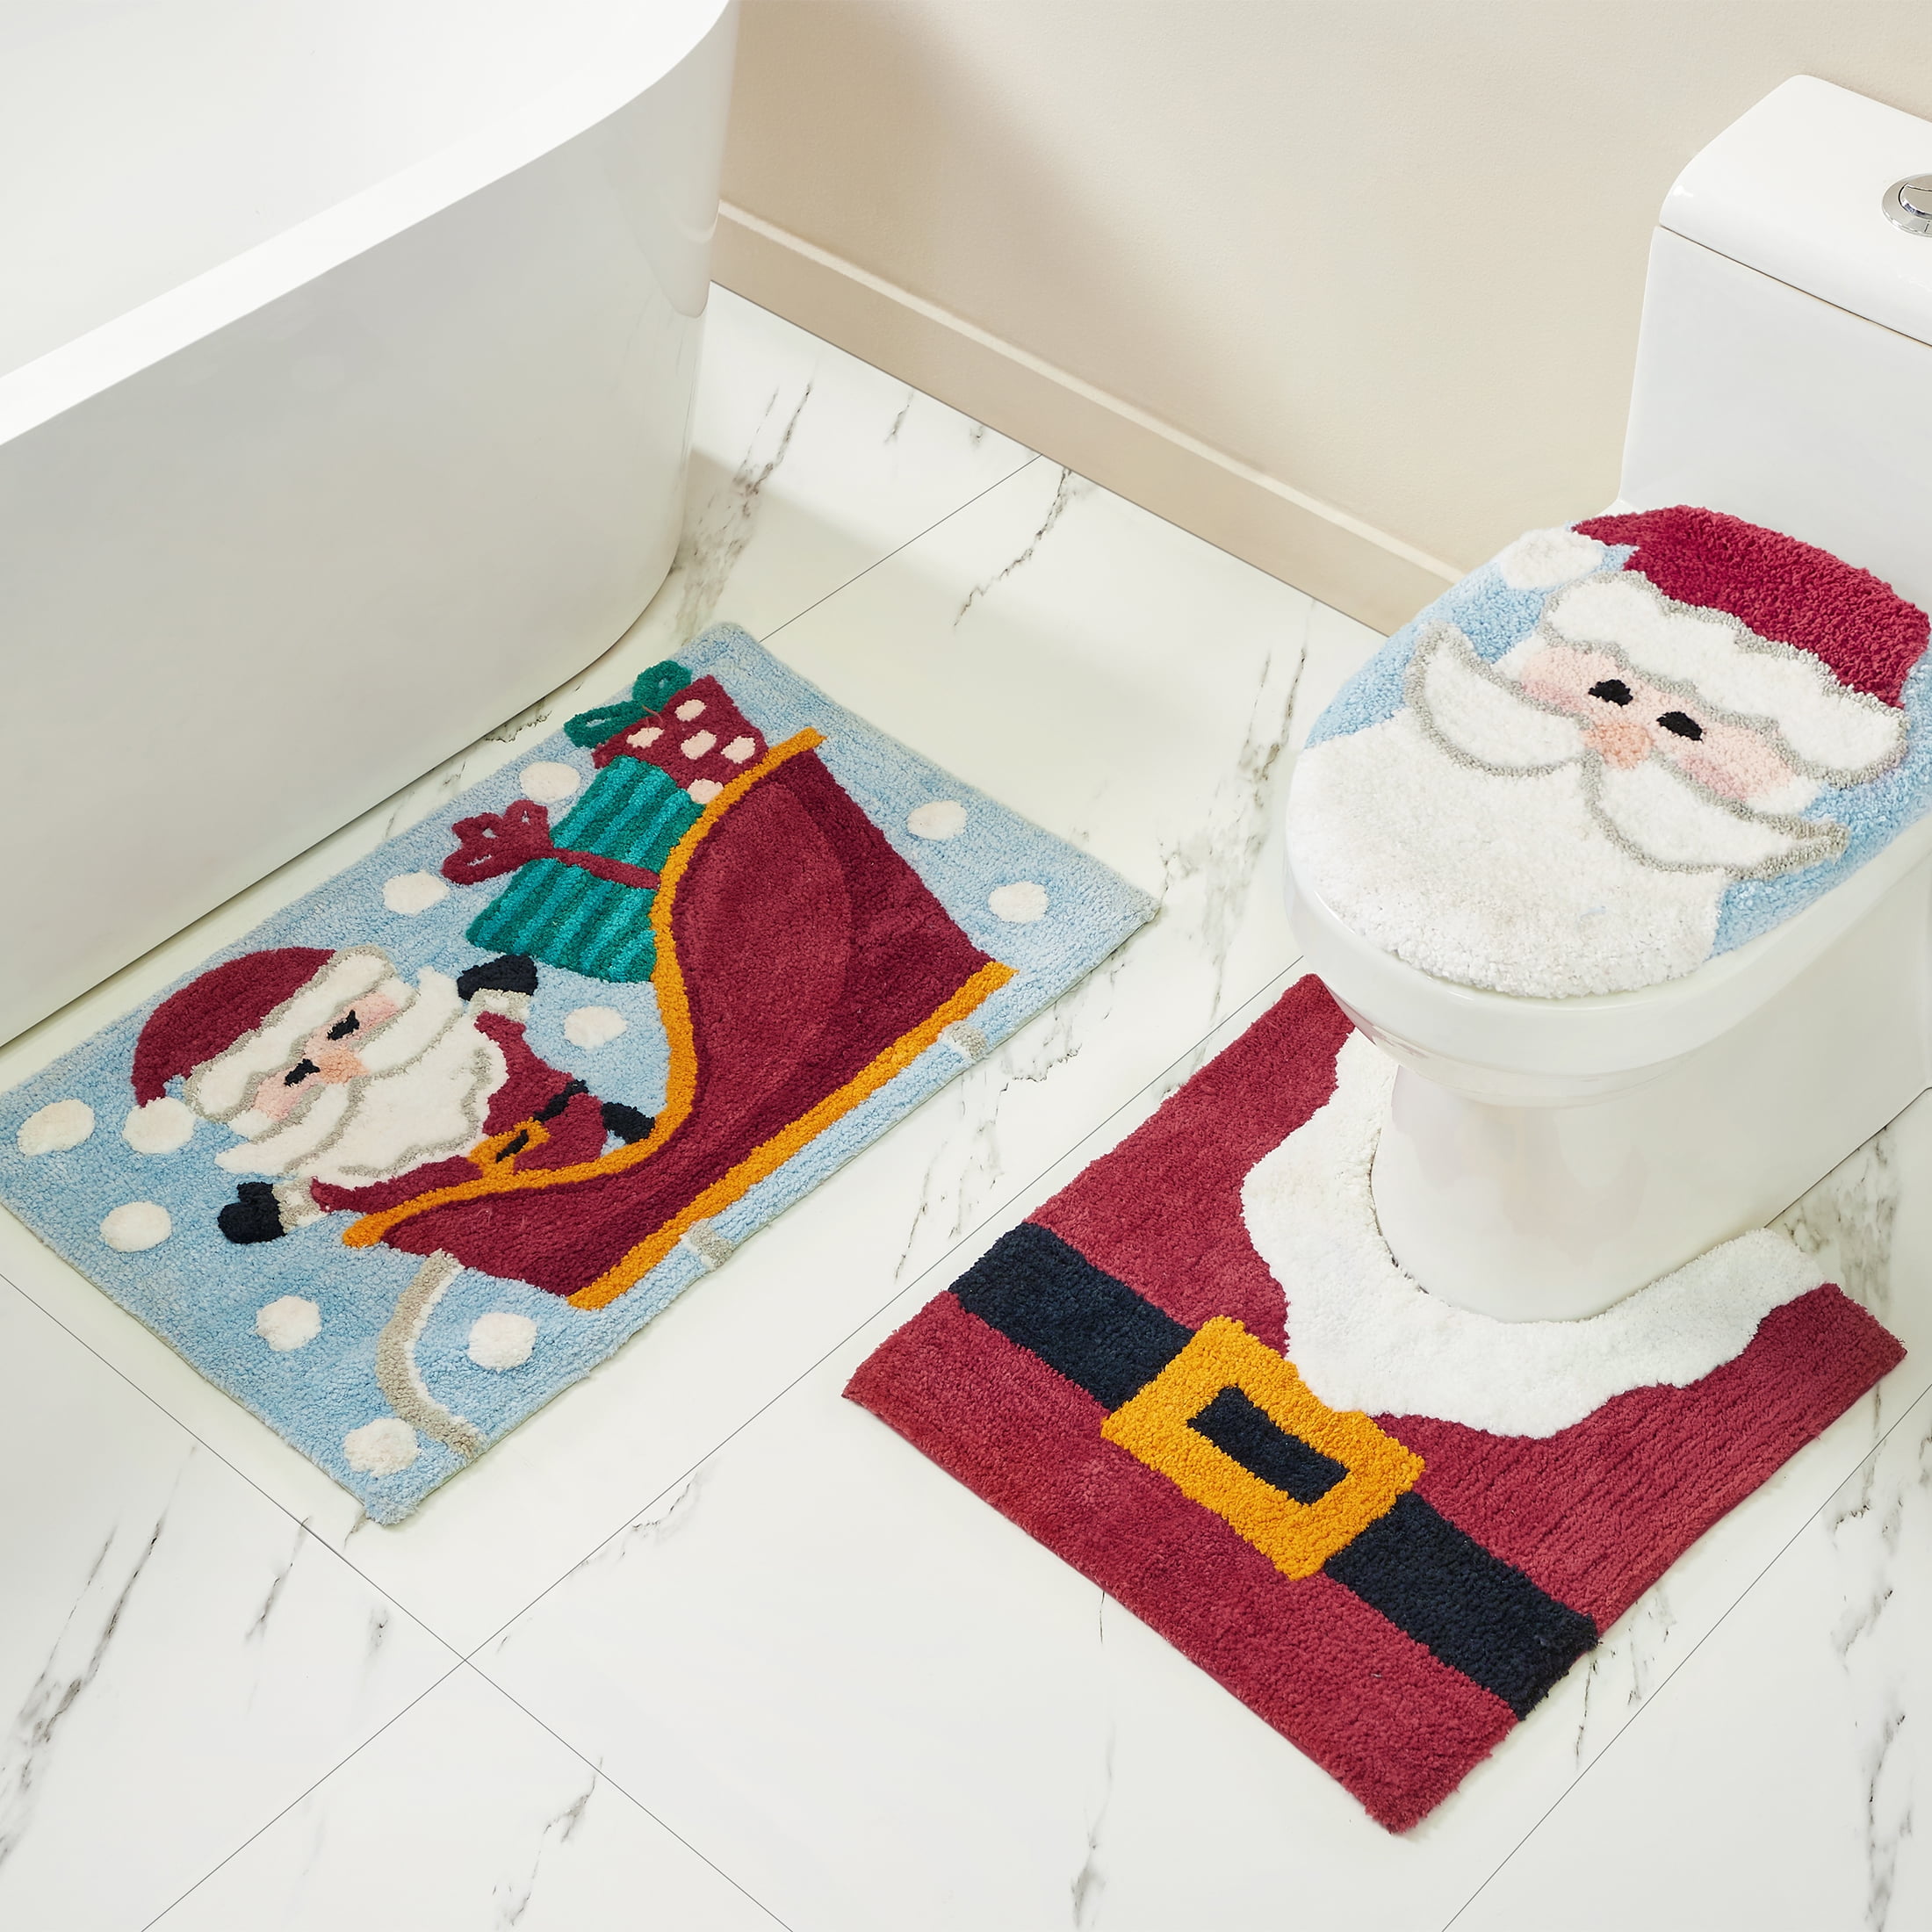 Christmas Decorations 3pcs Christmas Toilet Seat Cover Snowman Santa Toilet Seat Cover and Rug Set Non-Slip Mats for Bathroom Decorations 